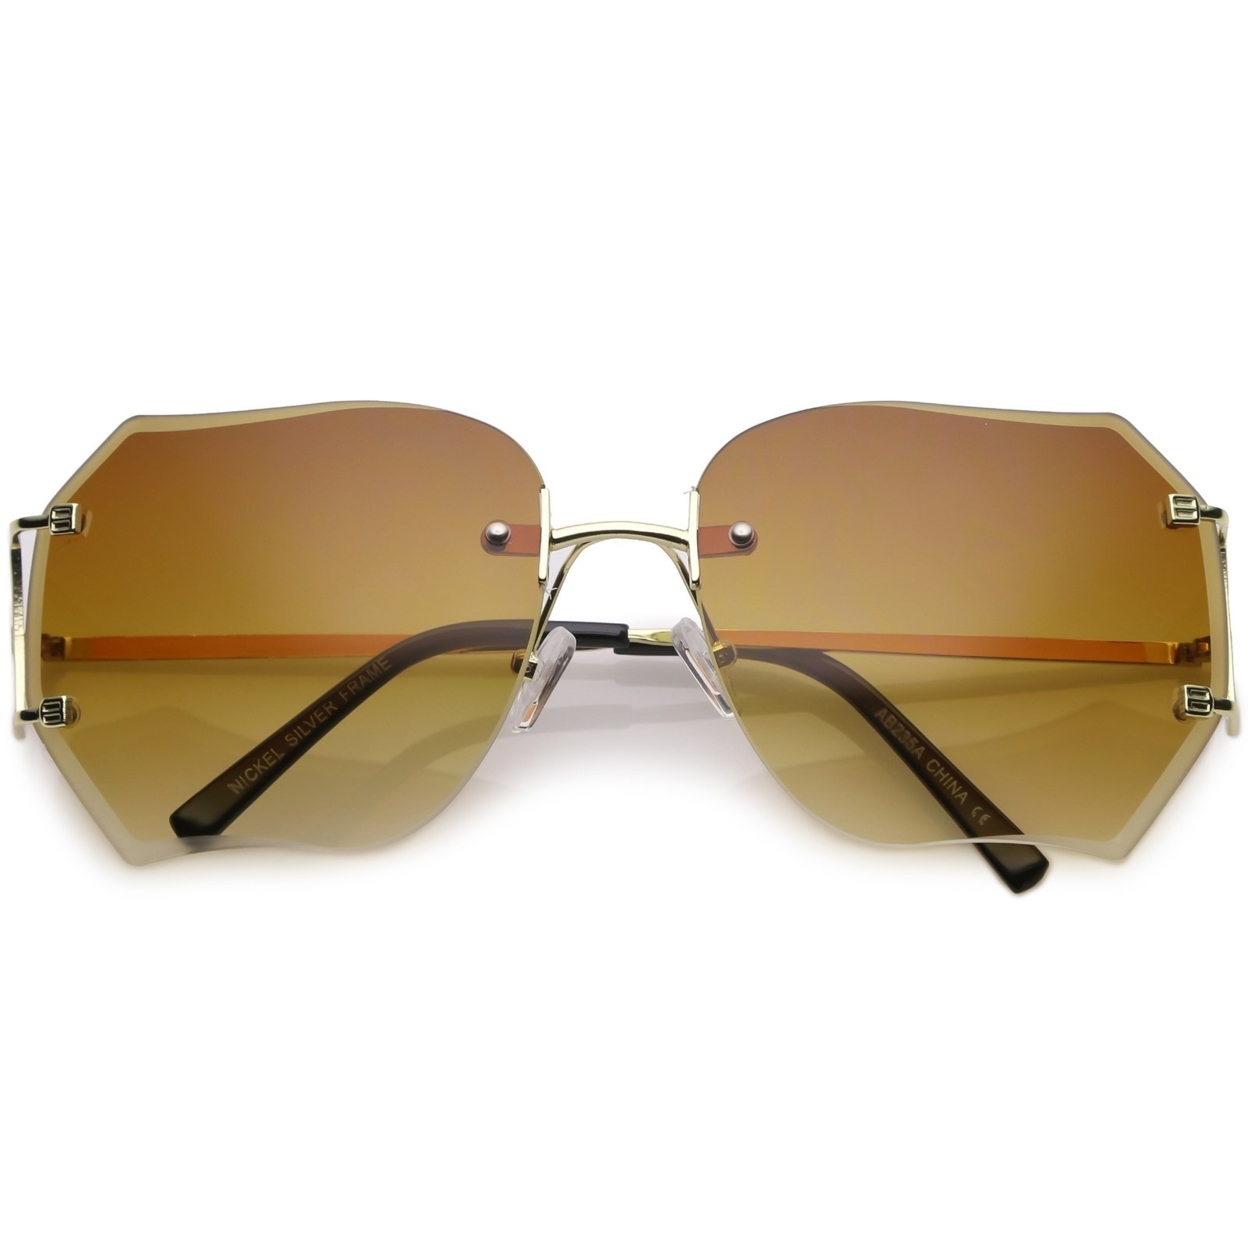 Oversize Rimless Square Sunglasses Slim Metal Arms Beveled Gradient Lens 61mm - Gold / Red Gradient